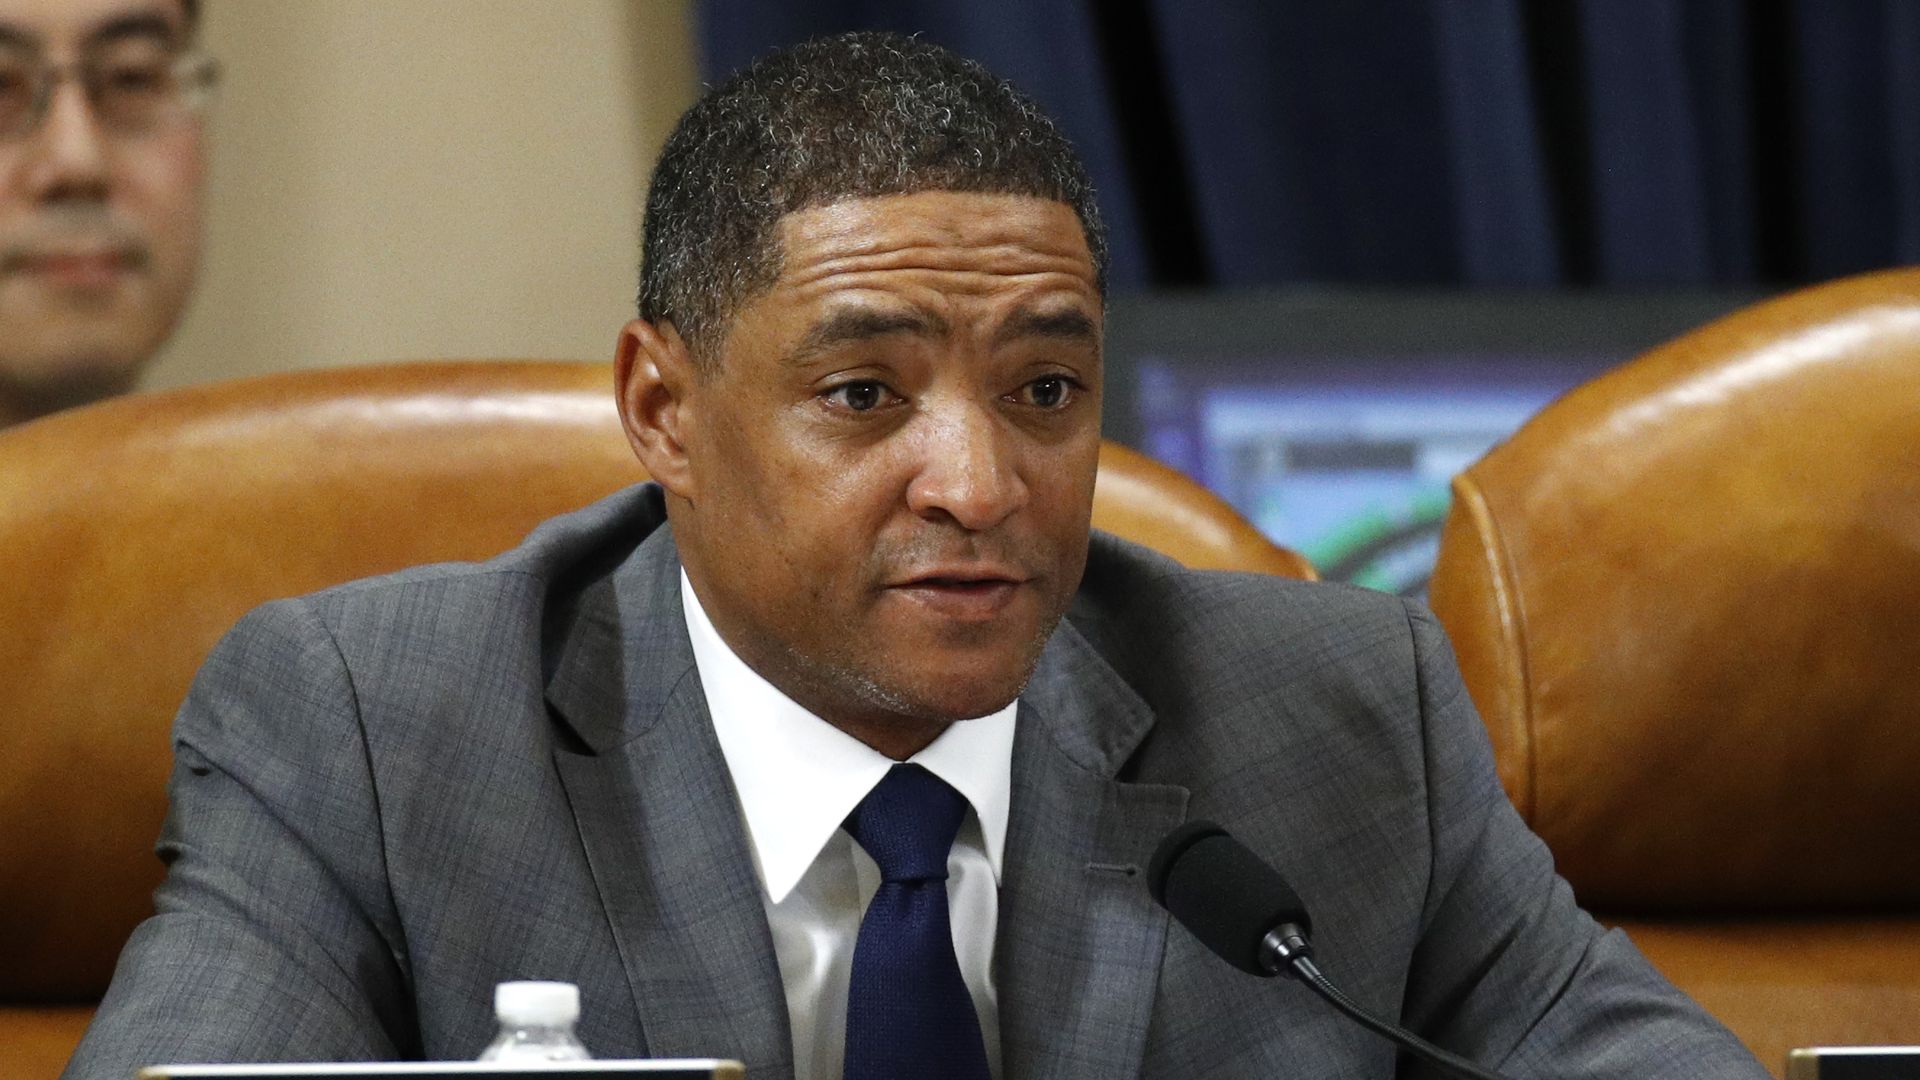 Rep. Cedric Richmond during a House Judiciary Committee meeting in December 2019.